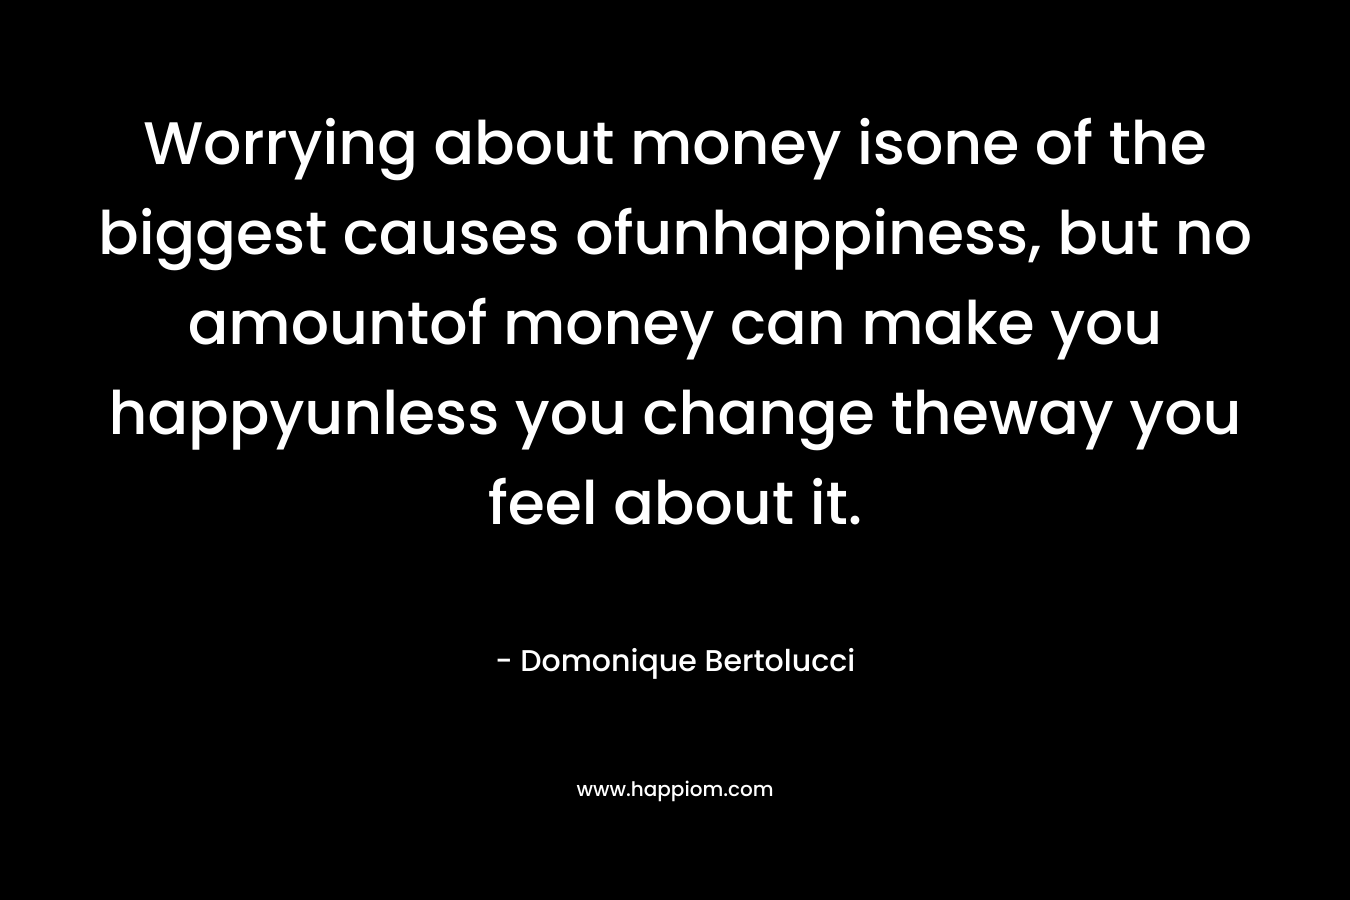 Worrying about money isone of the biggest causes ofunhappiness, but no amountof money can make you happyunless you change theway you feel about it. – Domonique Bertolucci